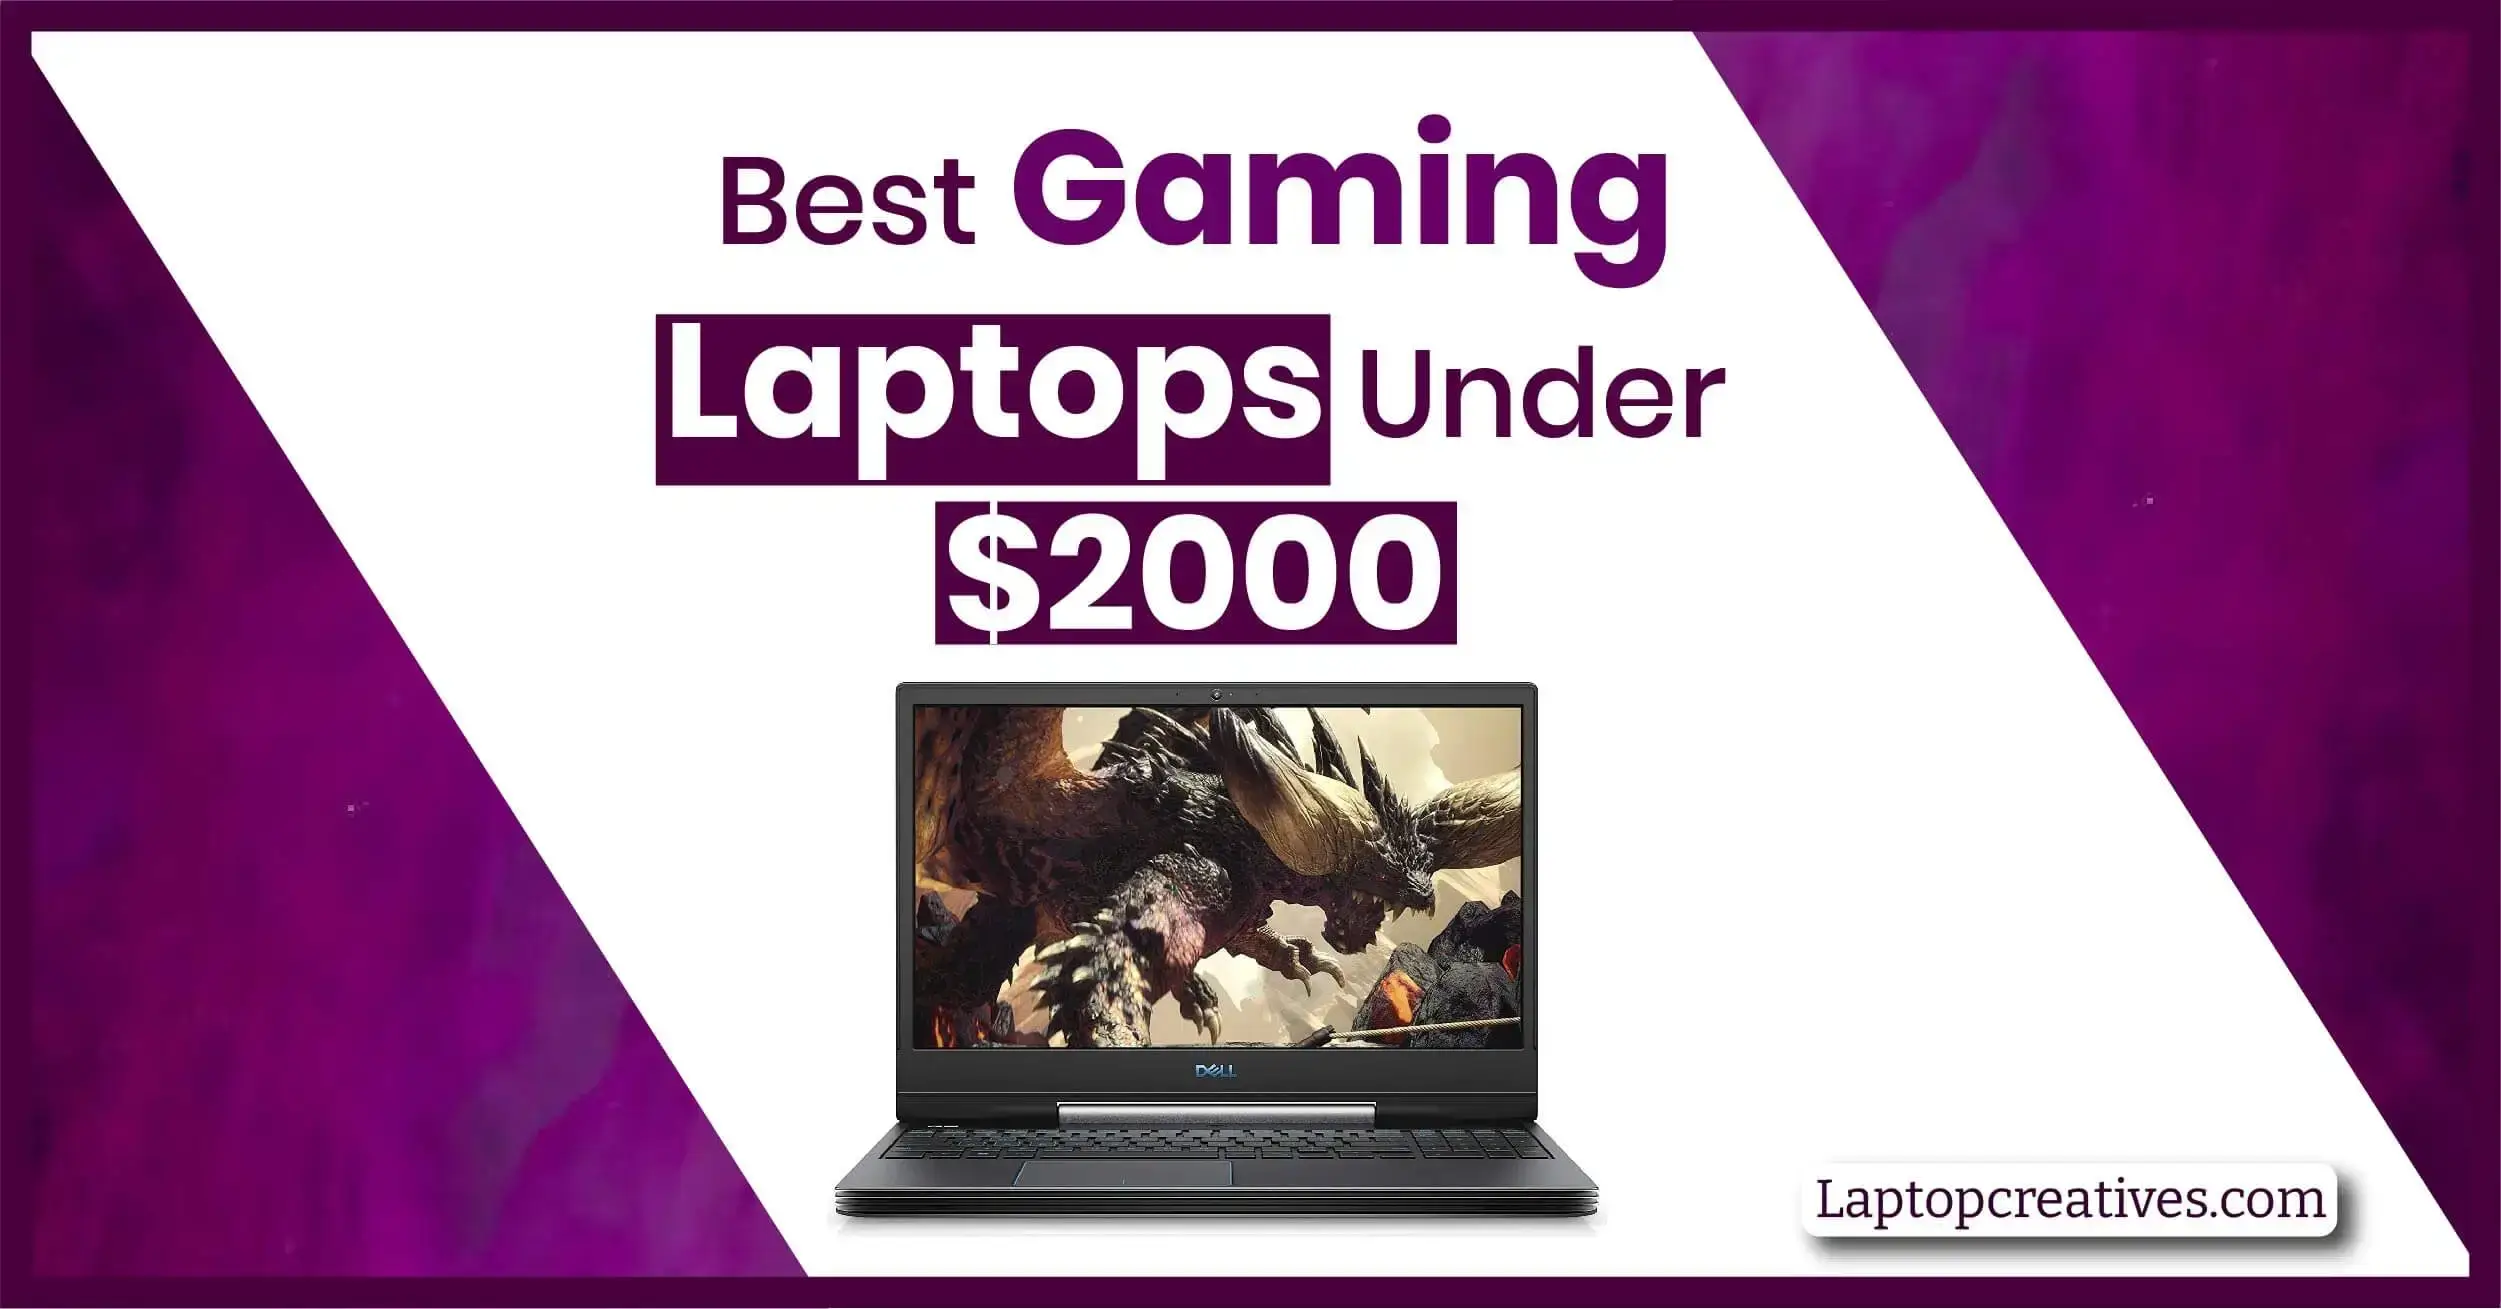 Best Gaming Laptop for $2000